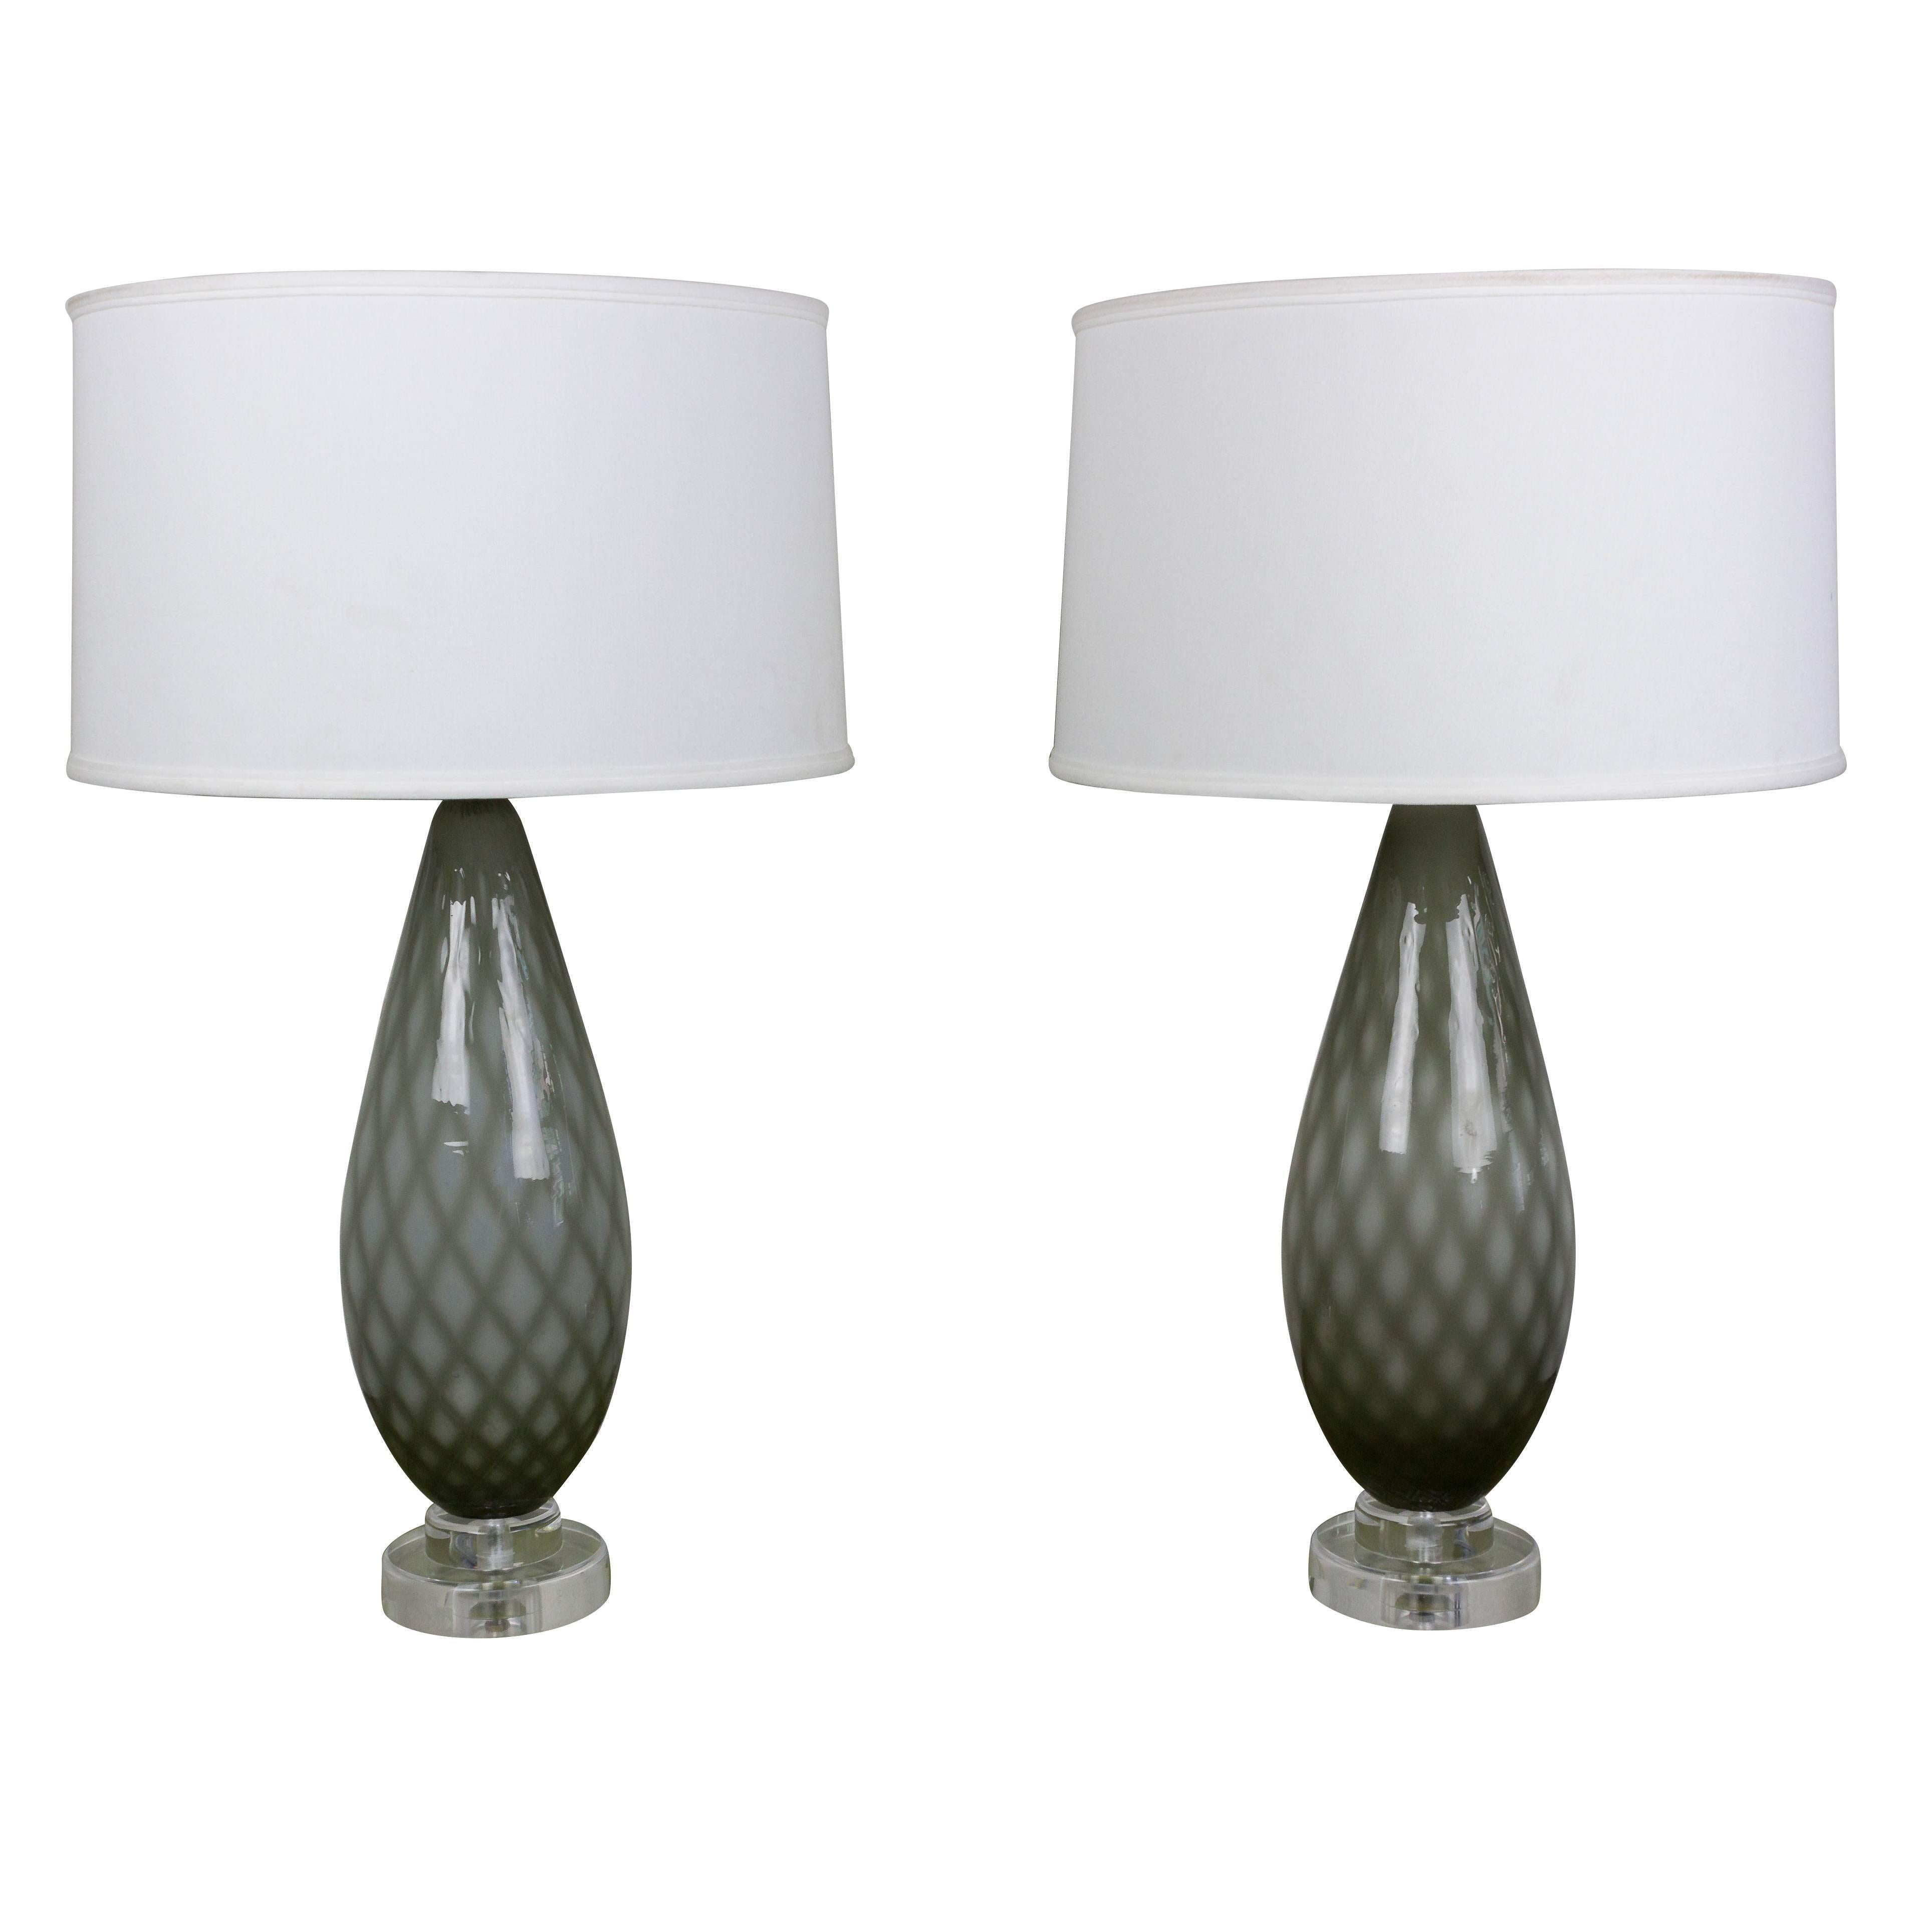 Pair of Grey and White Diamond Patterned Murano Table Lamps